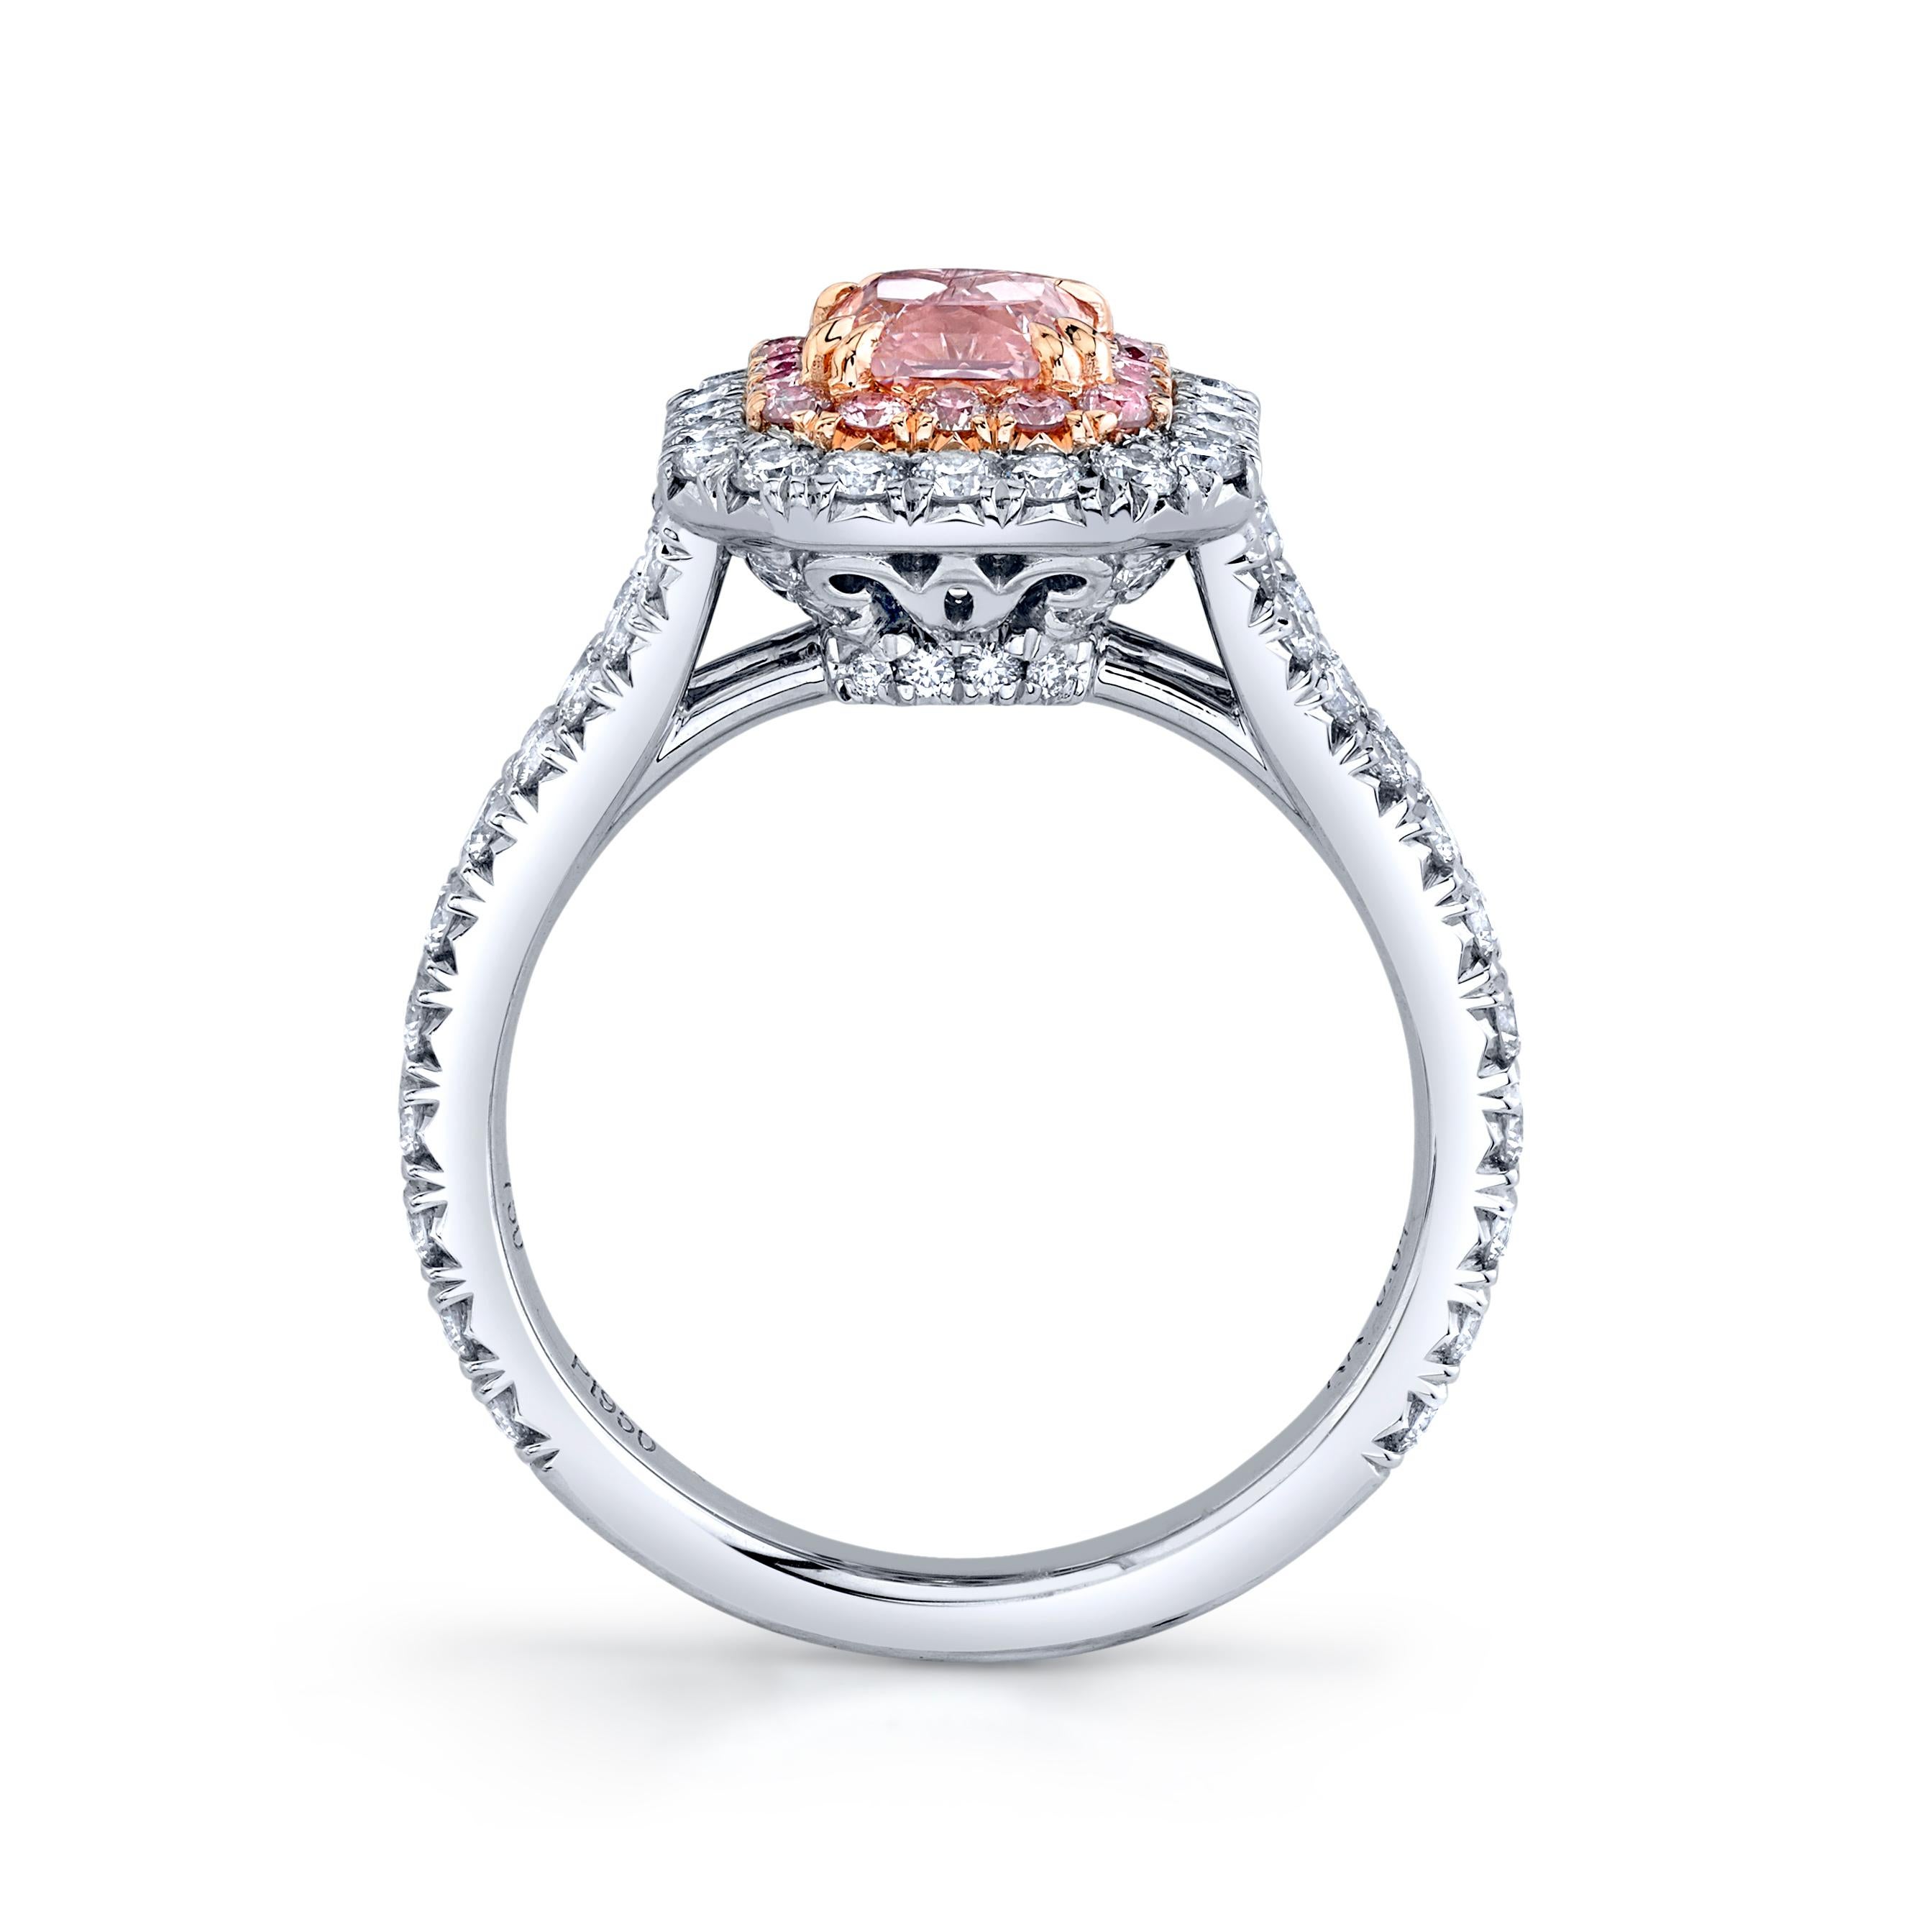 Contemporary GIA Certified 0.84 Carat Radiant Fancy Intense Pink Diamond Ring